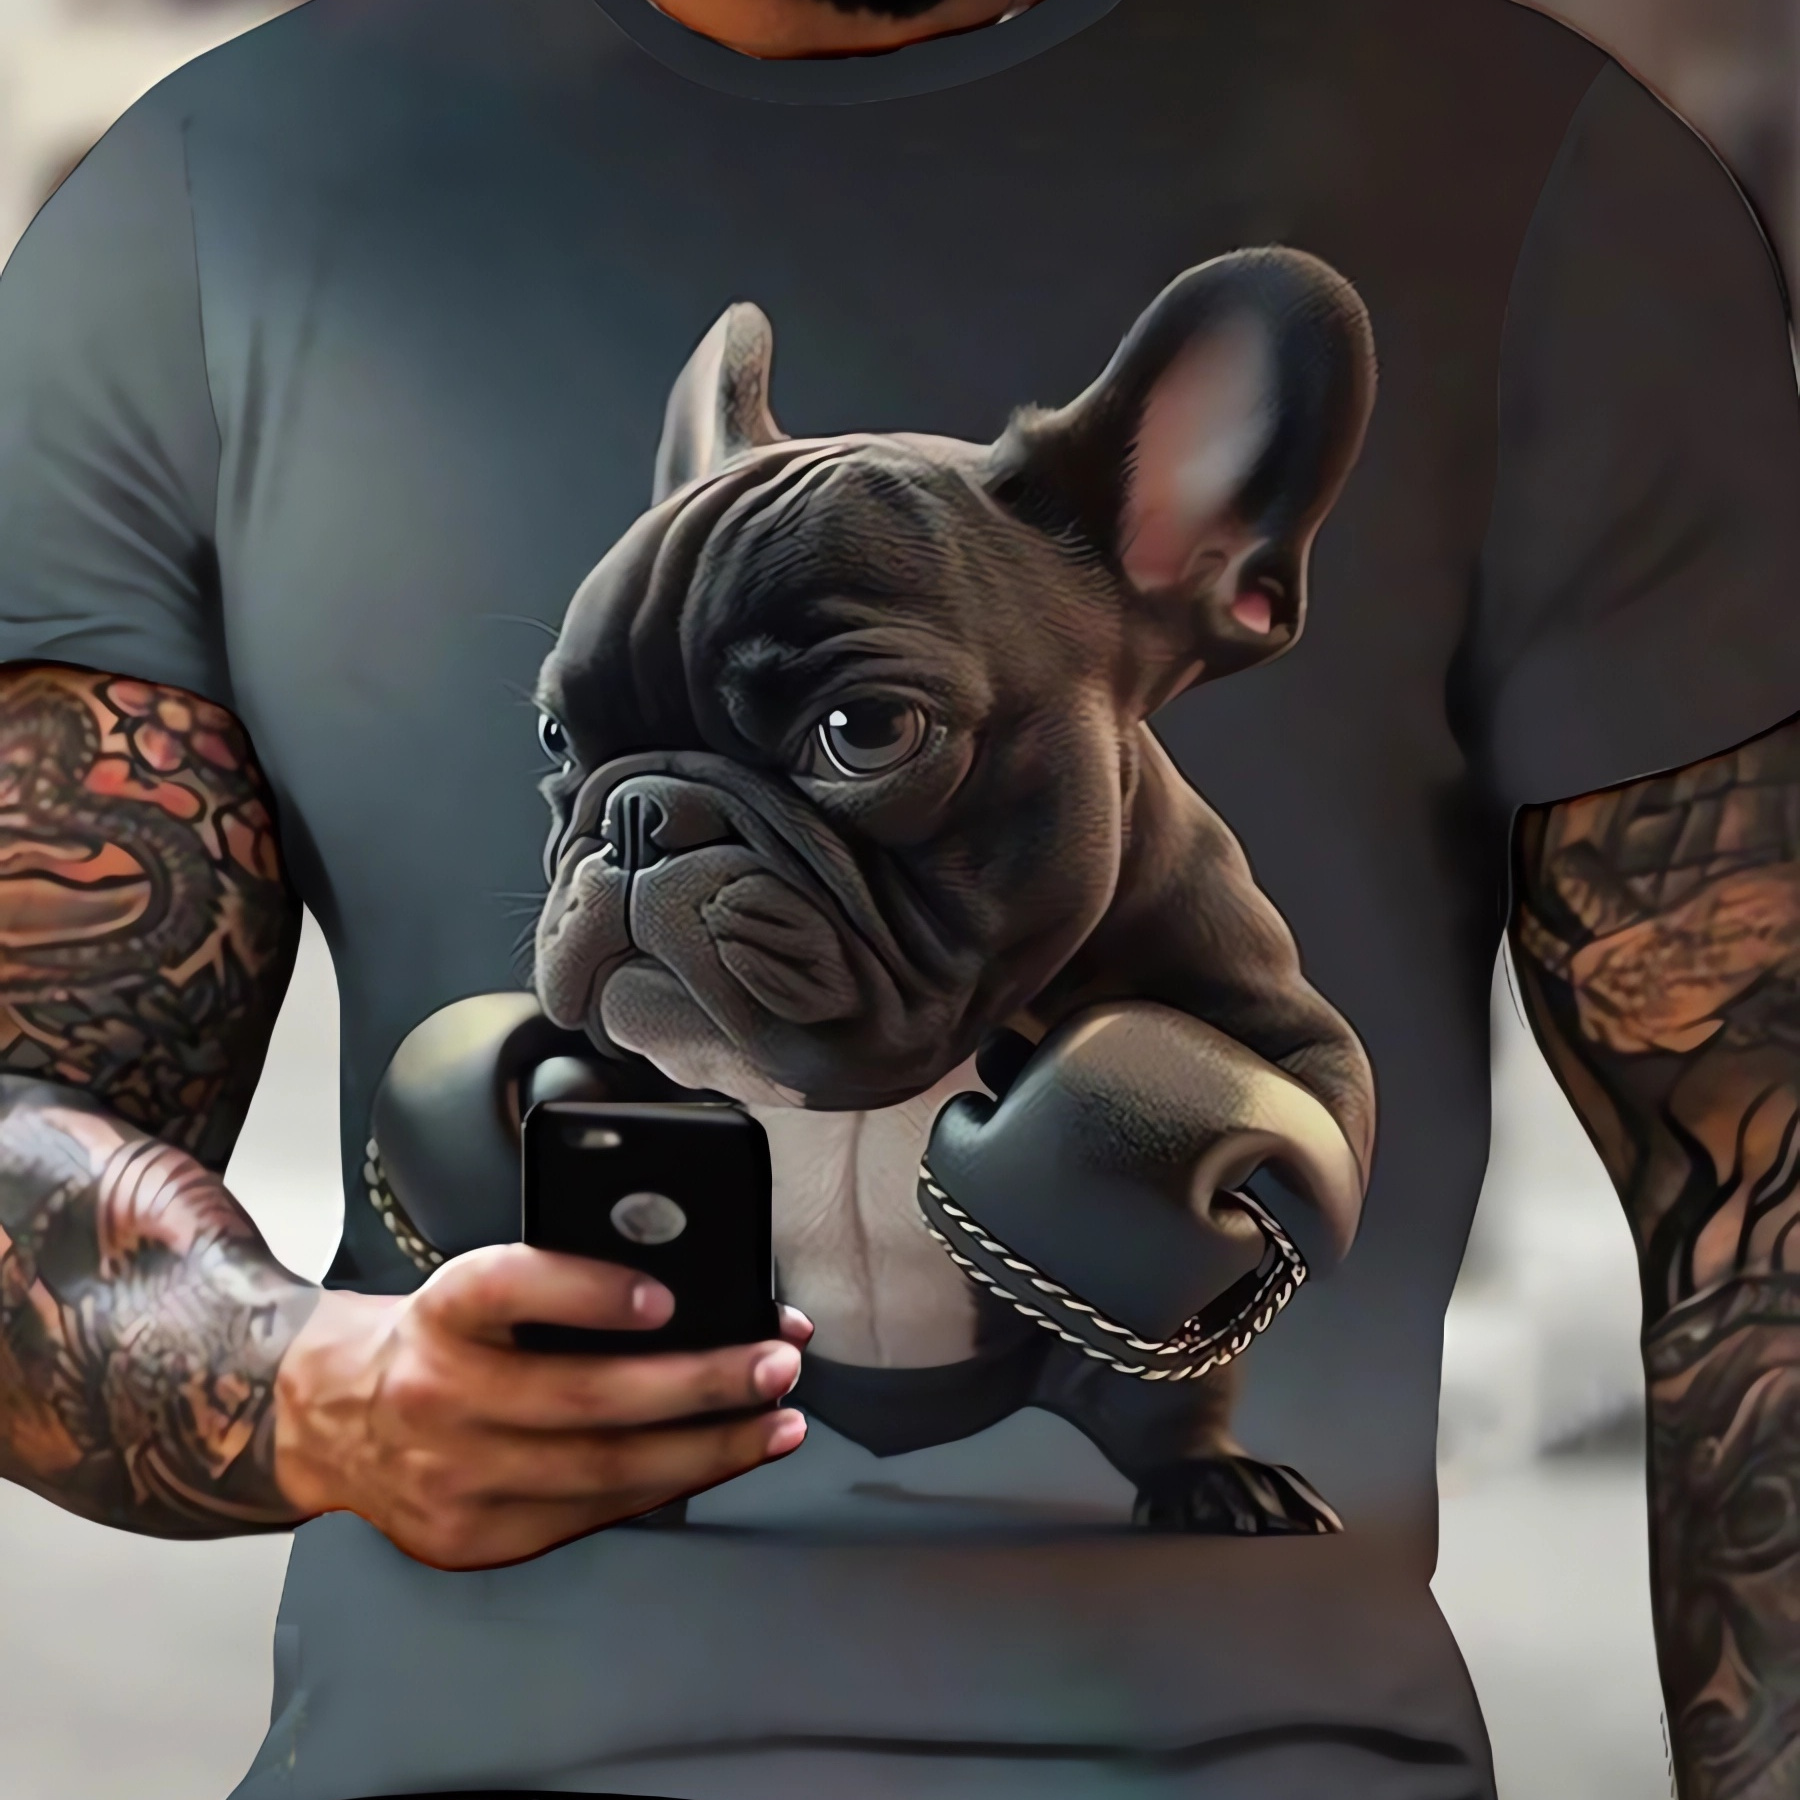 

3d Digital Bulldog With Boxing Gloves Pattern T-shirt With Crew Neck And Short Sleeve, Chic And Stylish Comfy Tops For Men's Summer Street Wear